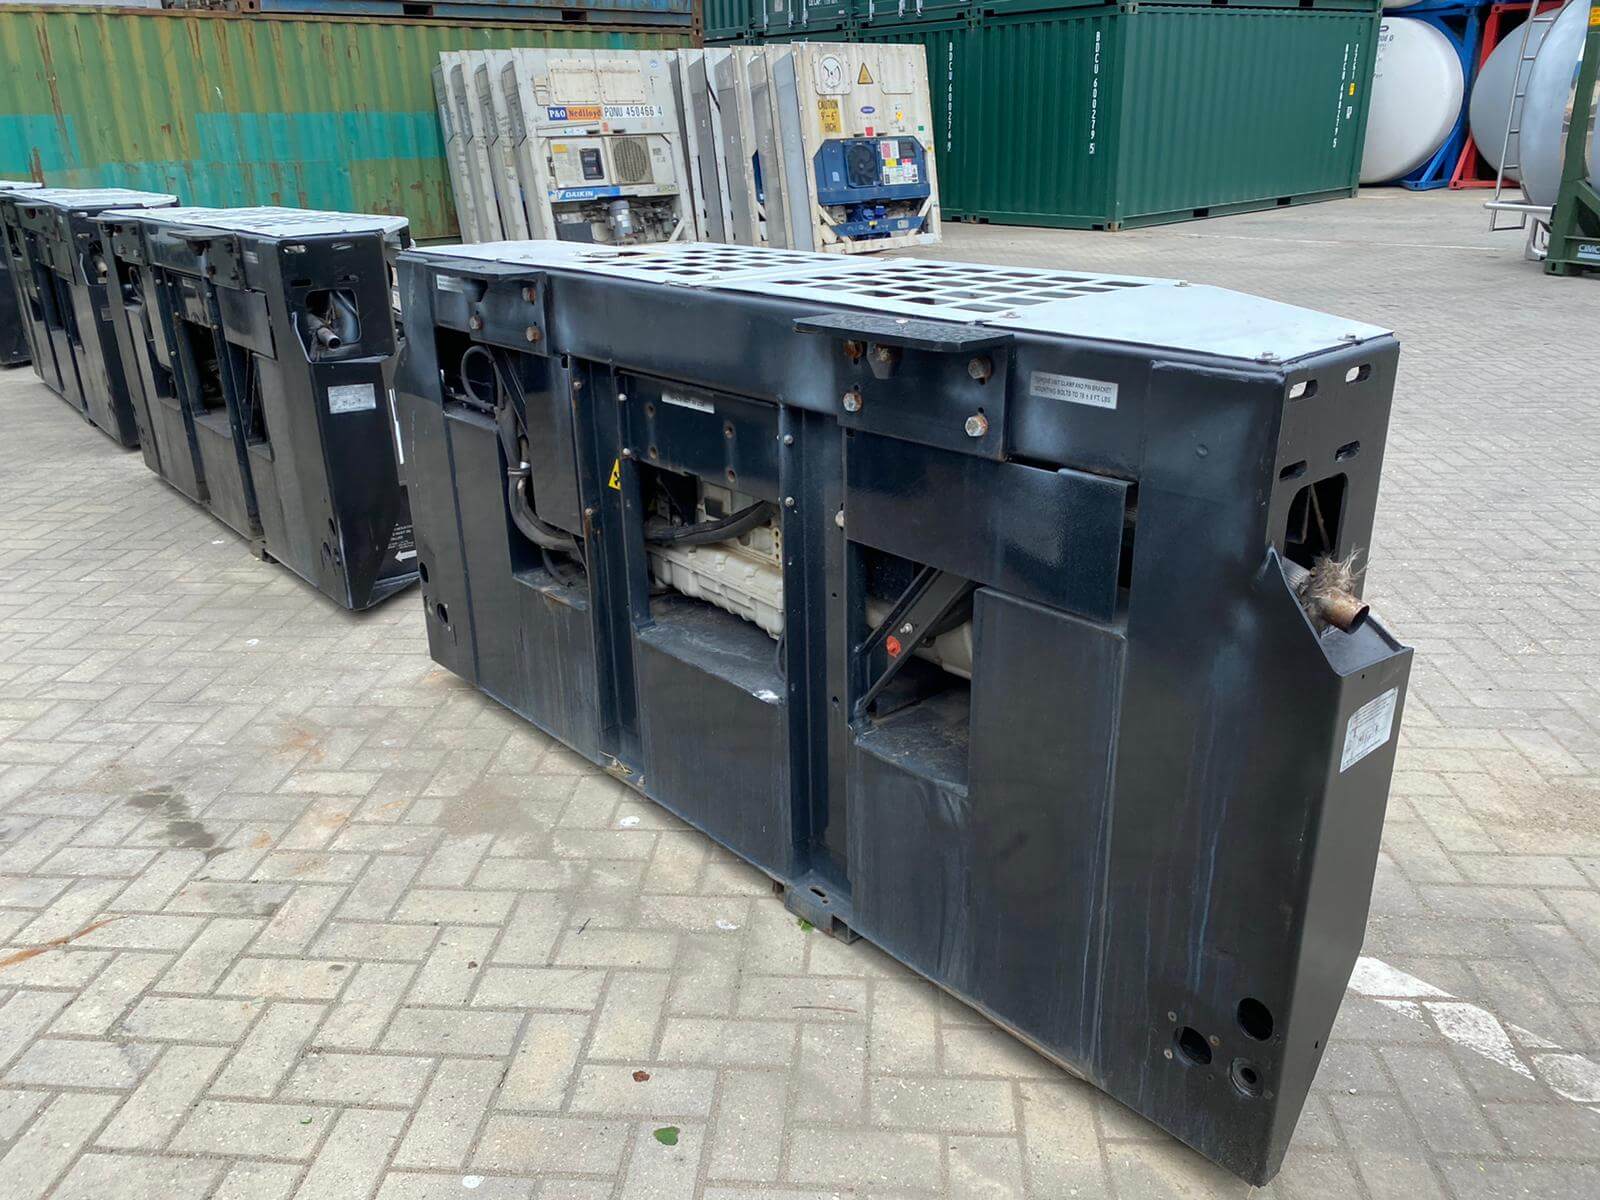 Thermo King gensets in excellent condition